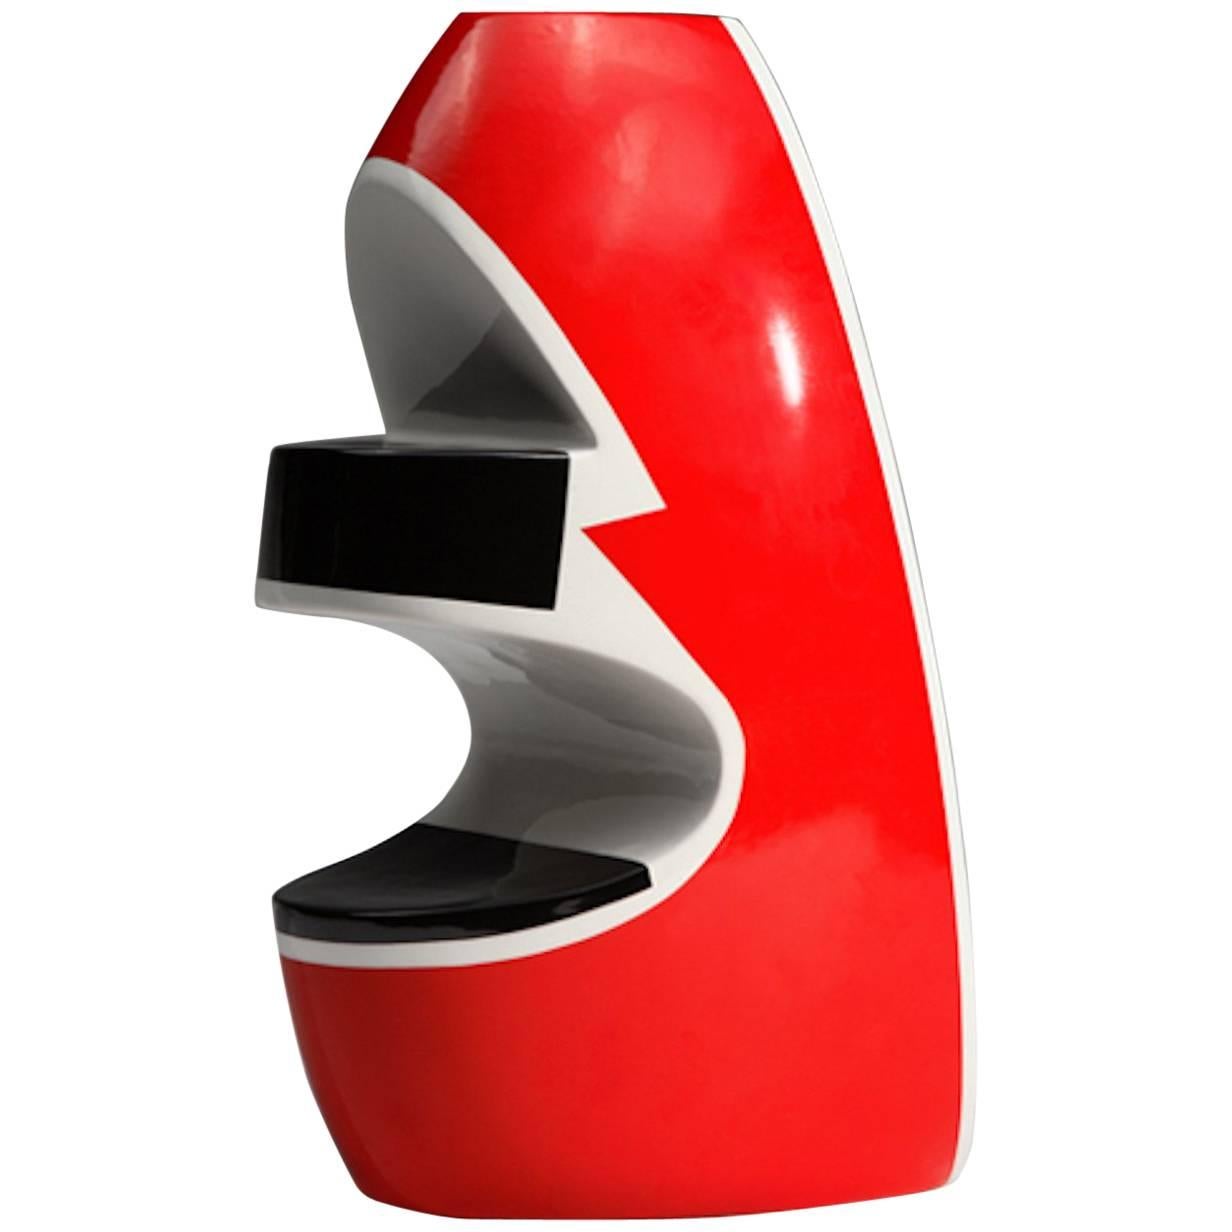 George Sowden, Red Vase, “Redyellowblack” Collection, Superego Editions